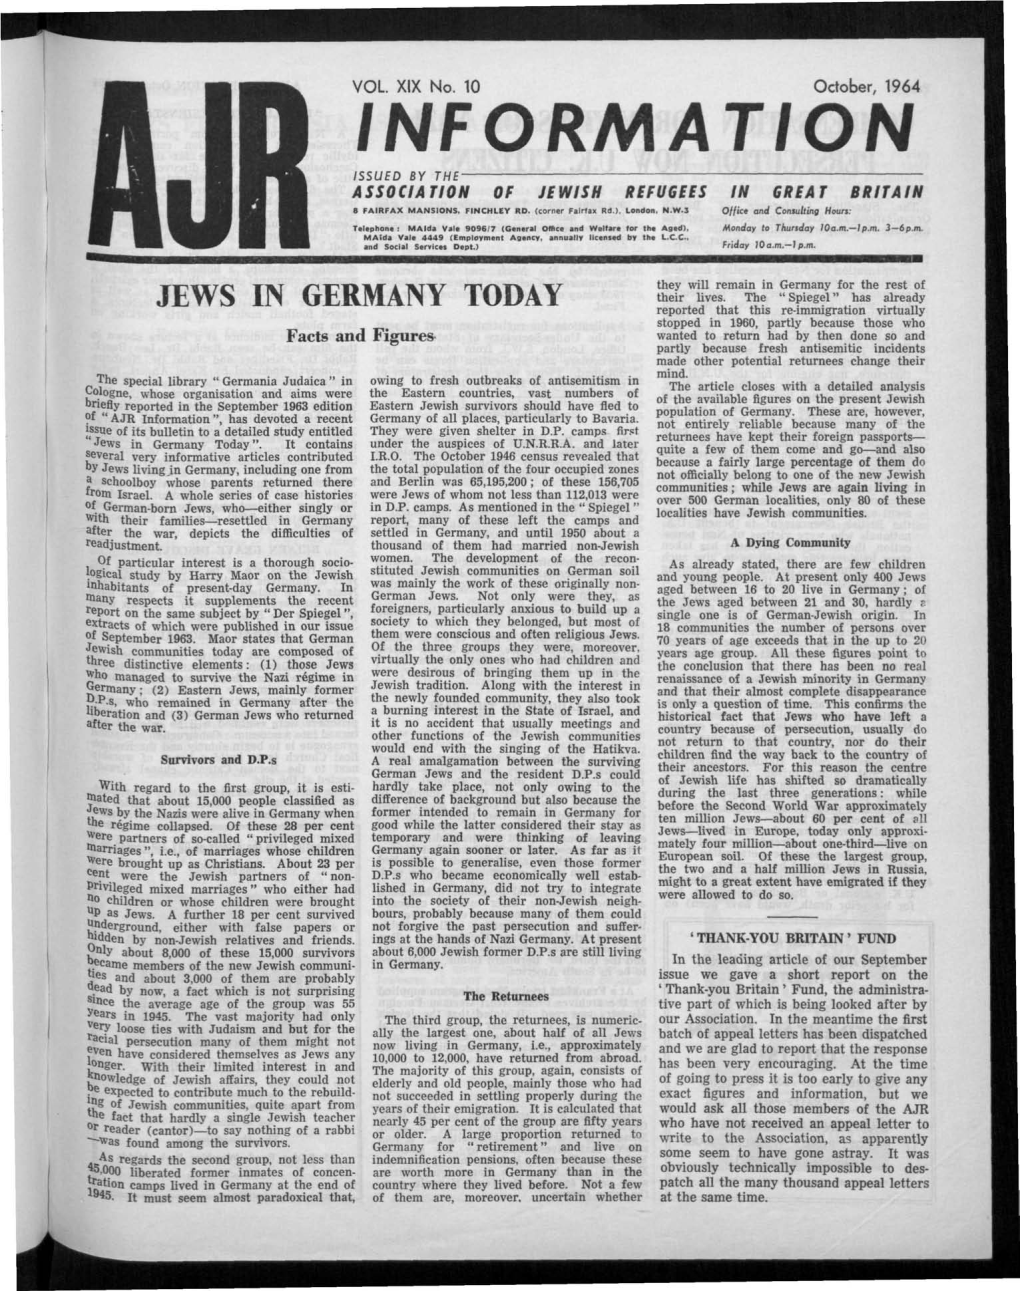 INFORMATION ISSUED by the ASSOCIATION of JEWISH REFUGEES in GREAT BRITAIN a FAIRFAX MANSIONS, FINCHLEY RD